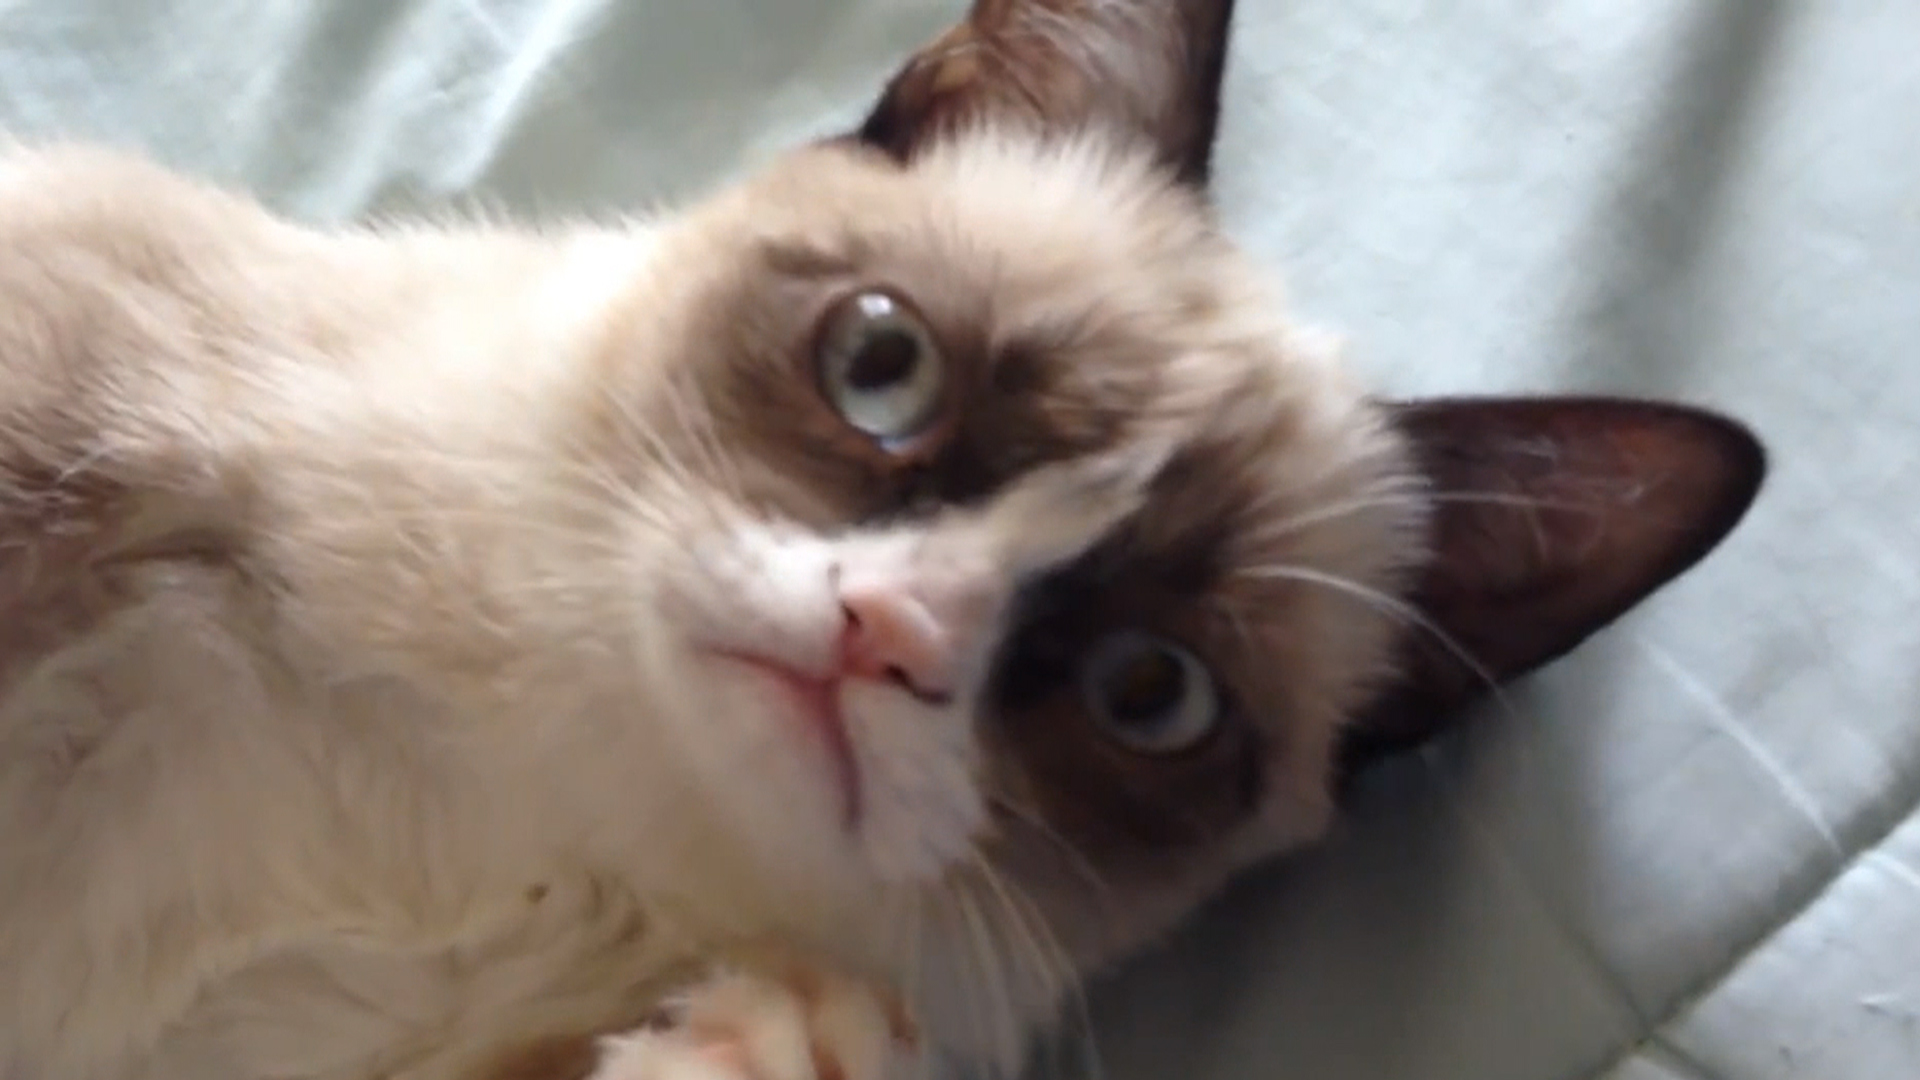 Scientists Explain Why Watching Internet Cat Videos Is Good for You